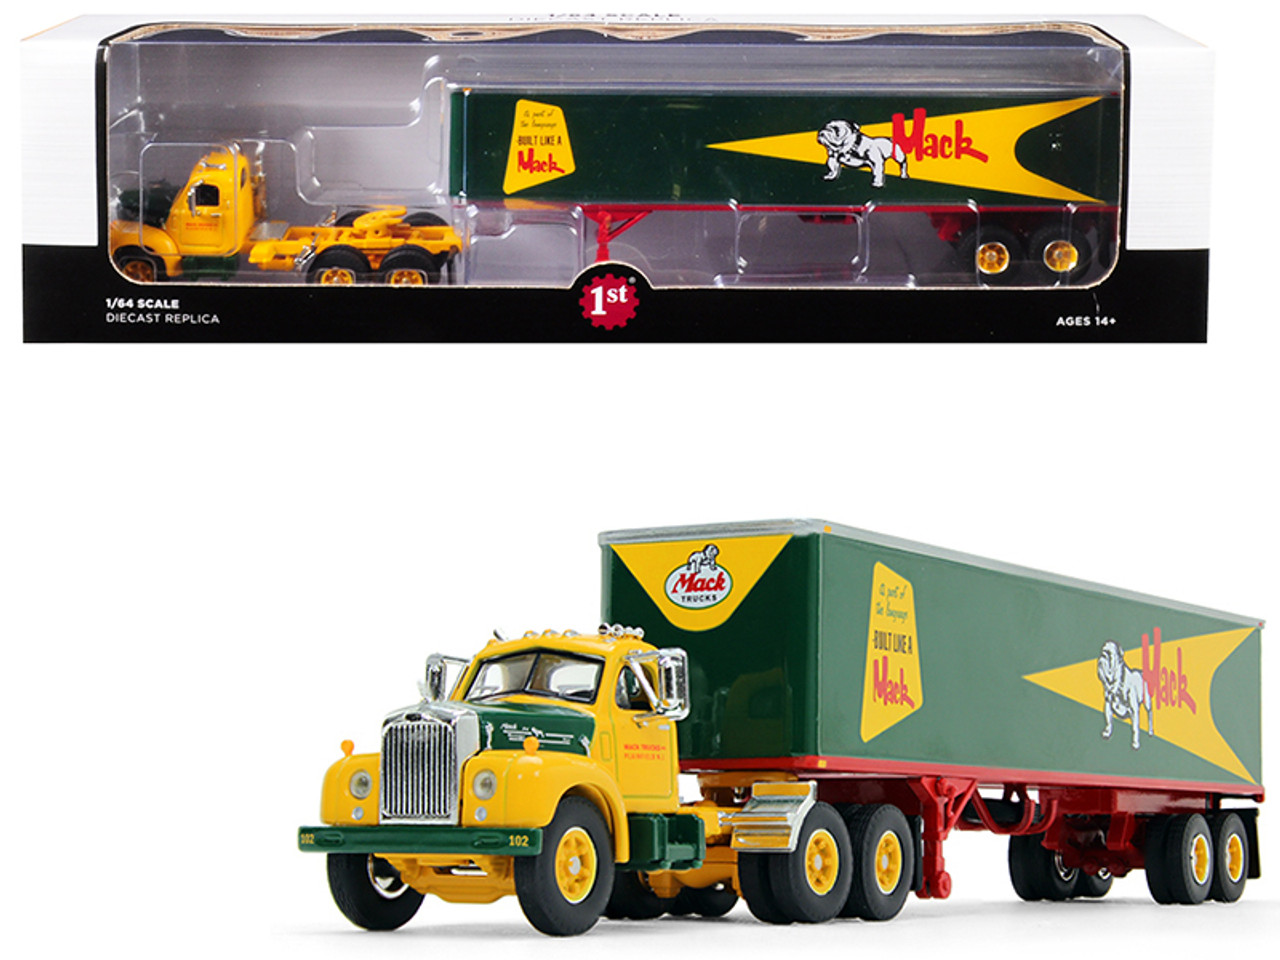 Mack B-61 Day Cab with 40' Vintage Trailer "Built Like a Mack" Yellow and Green 1/64 Diecast Model by First Gear